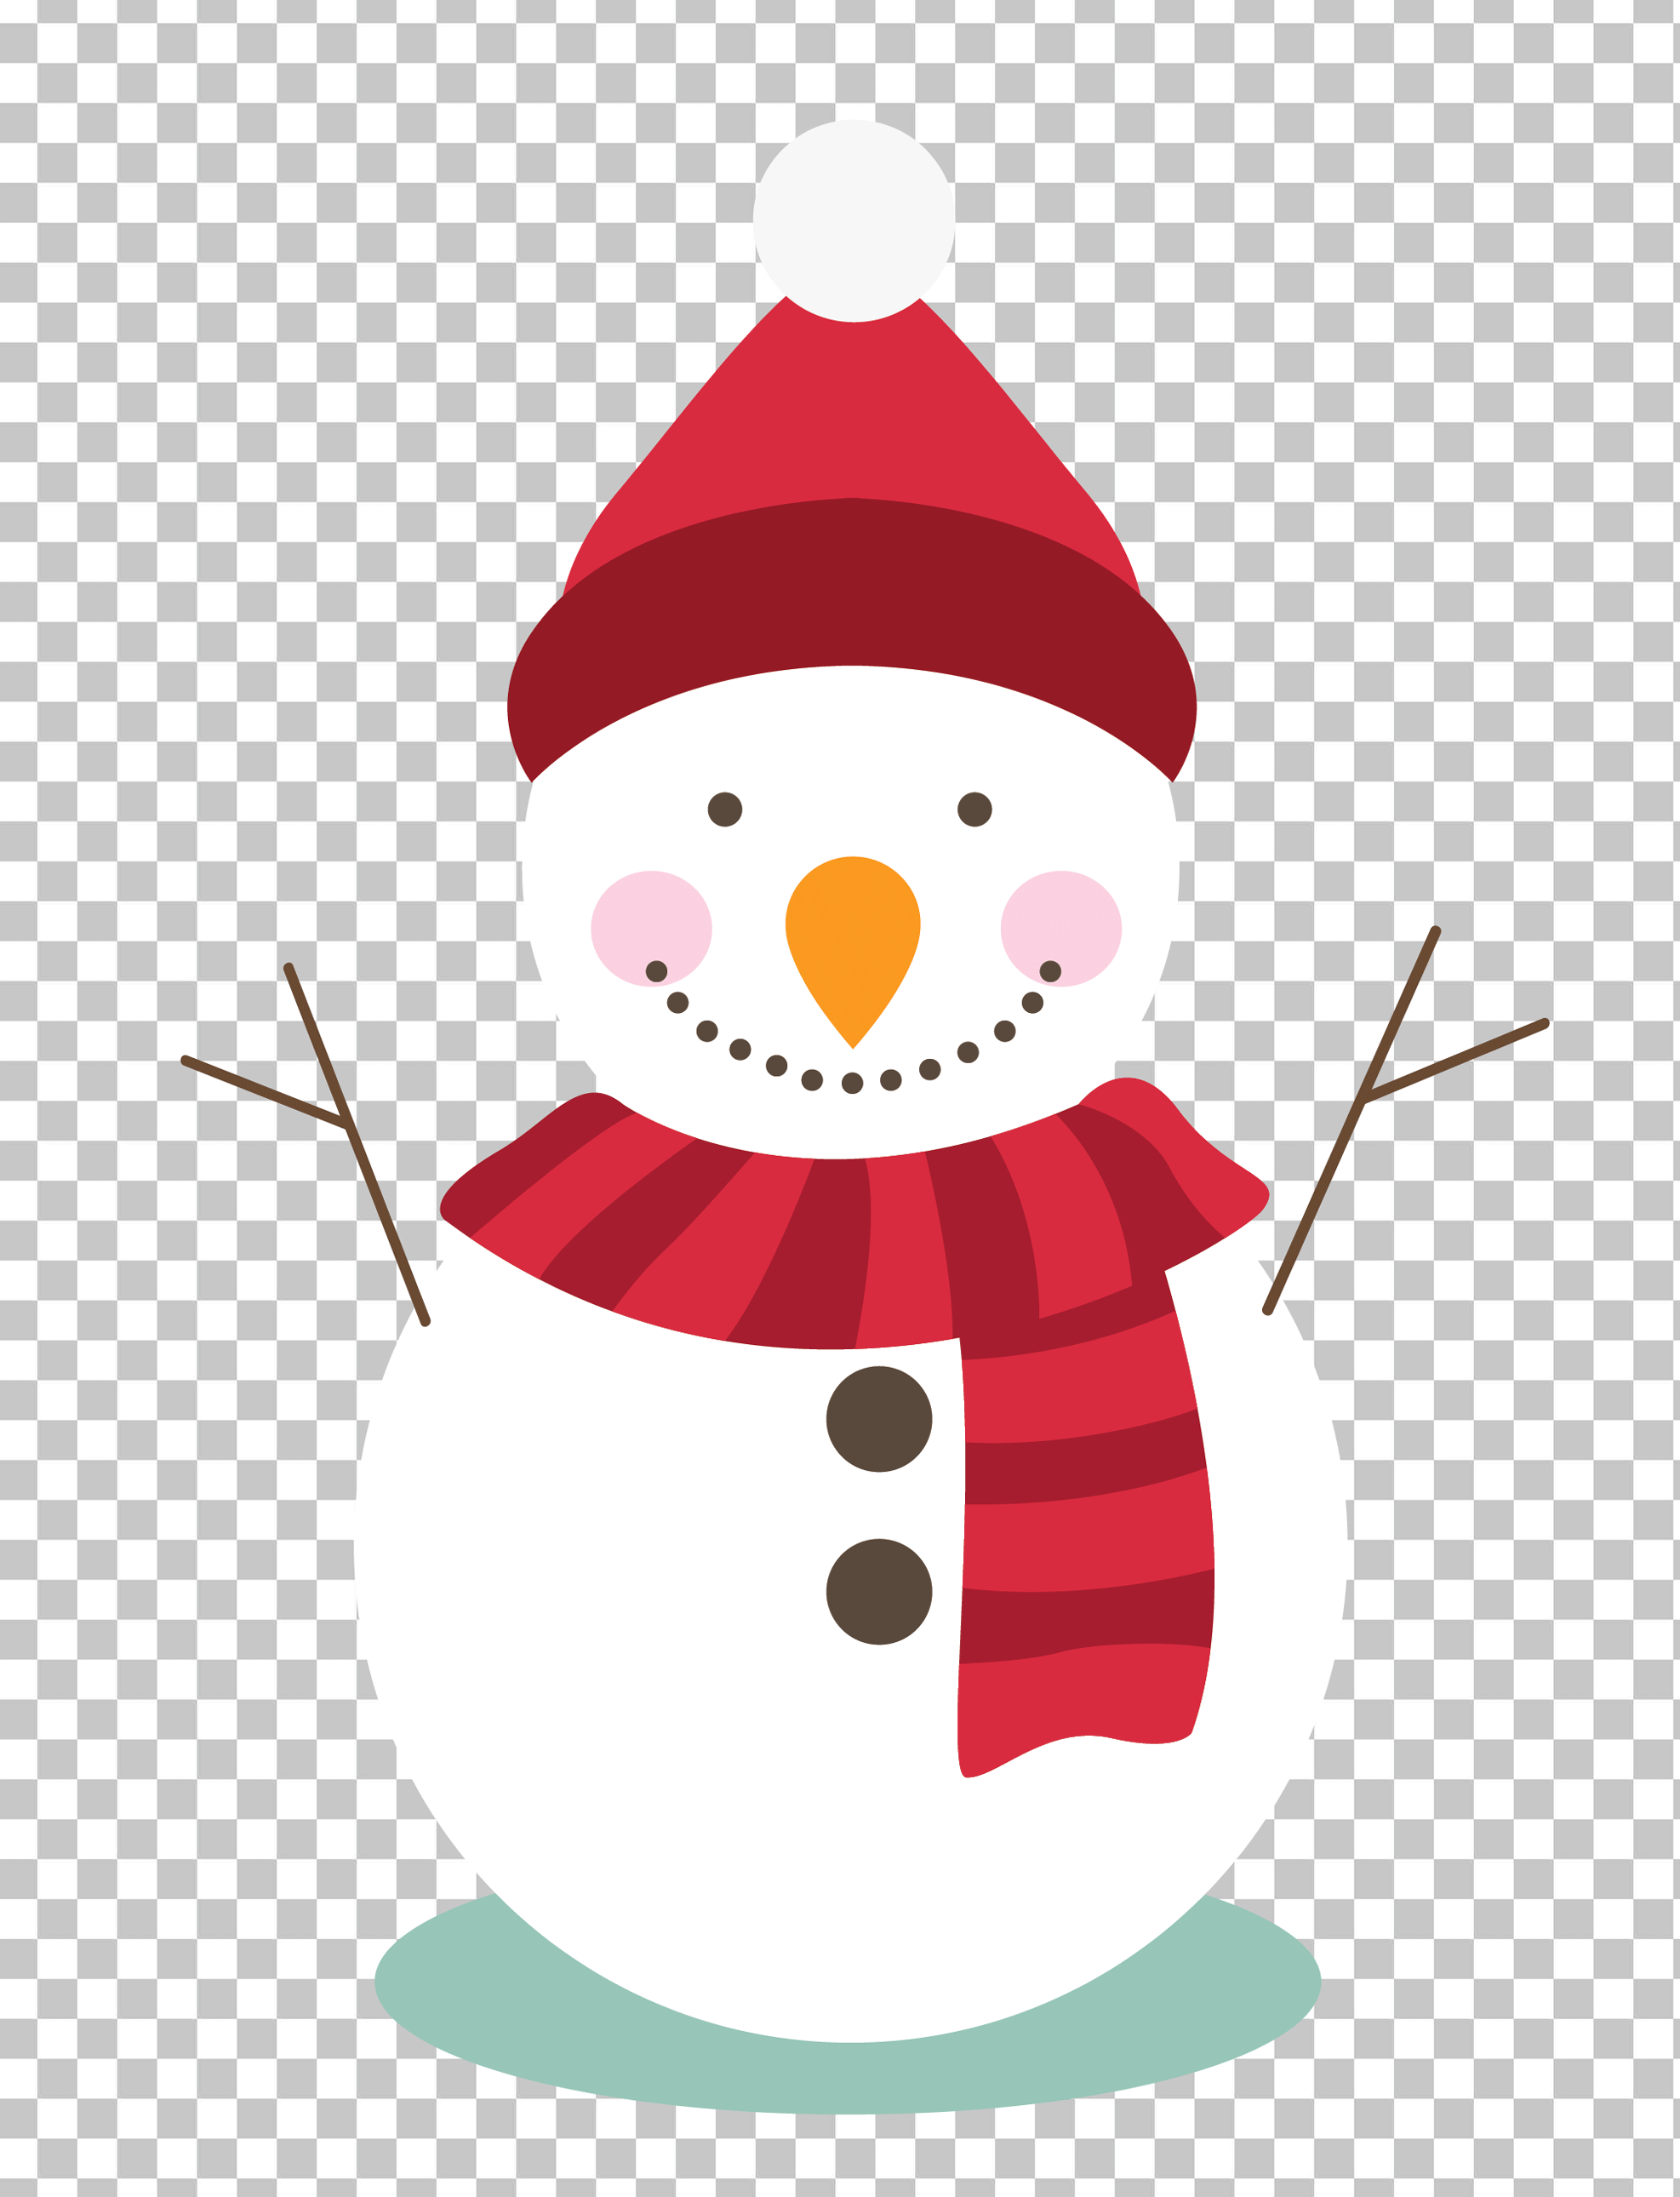 Snowman wearing a red hat and scarf.